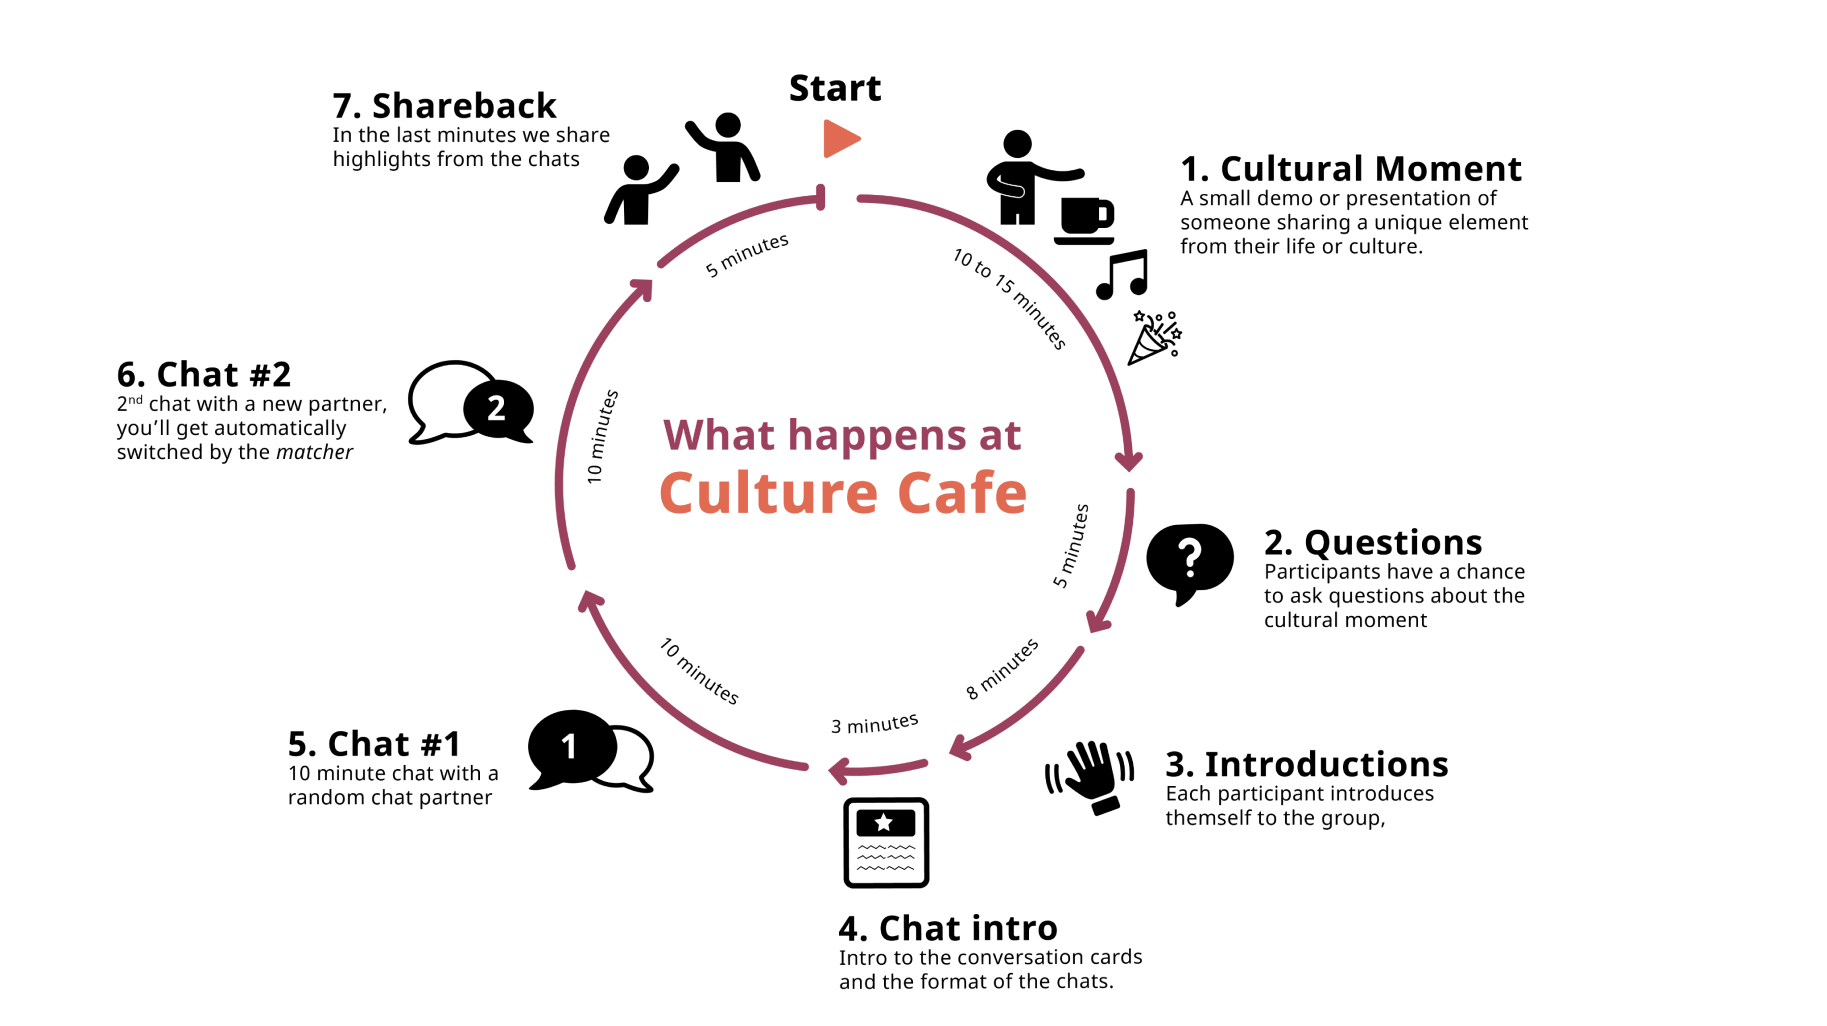 a circular diagram showing the different stages of culture cafe